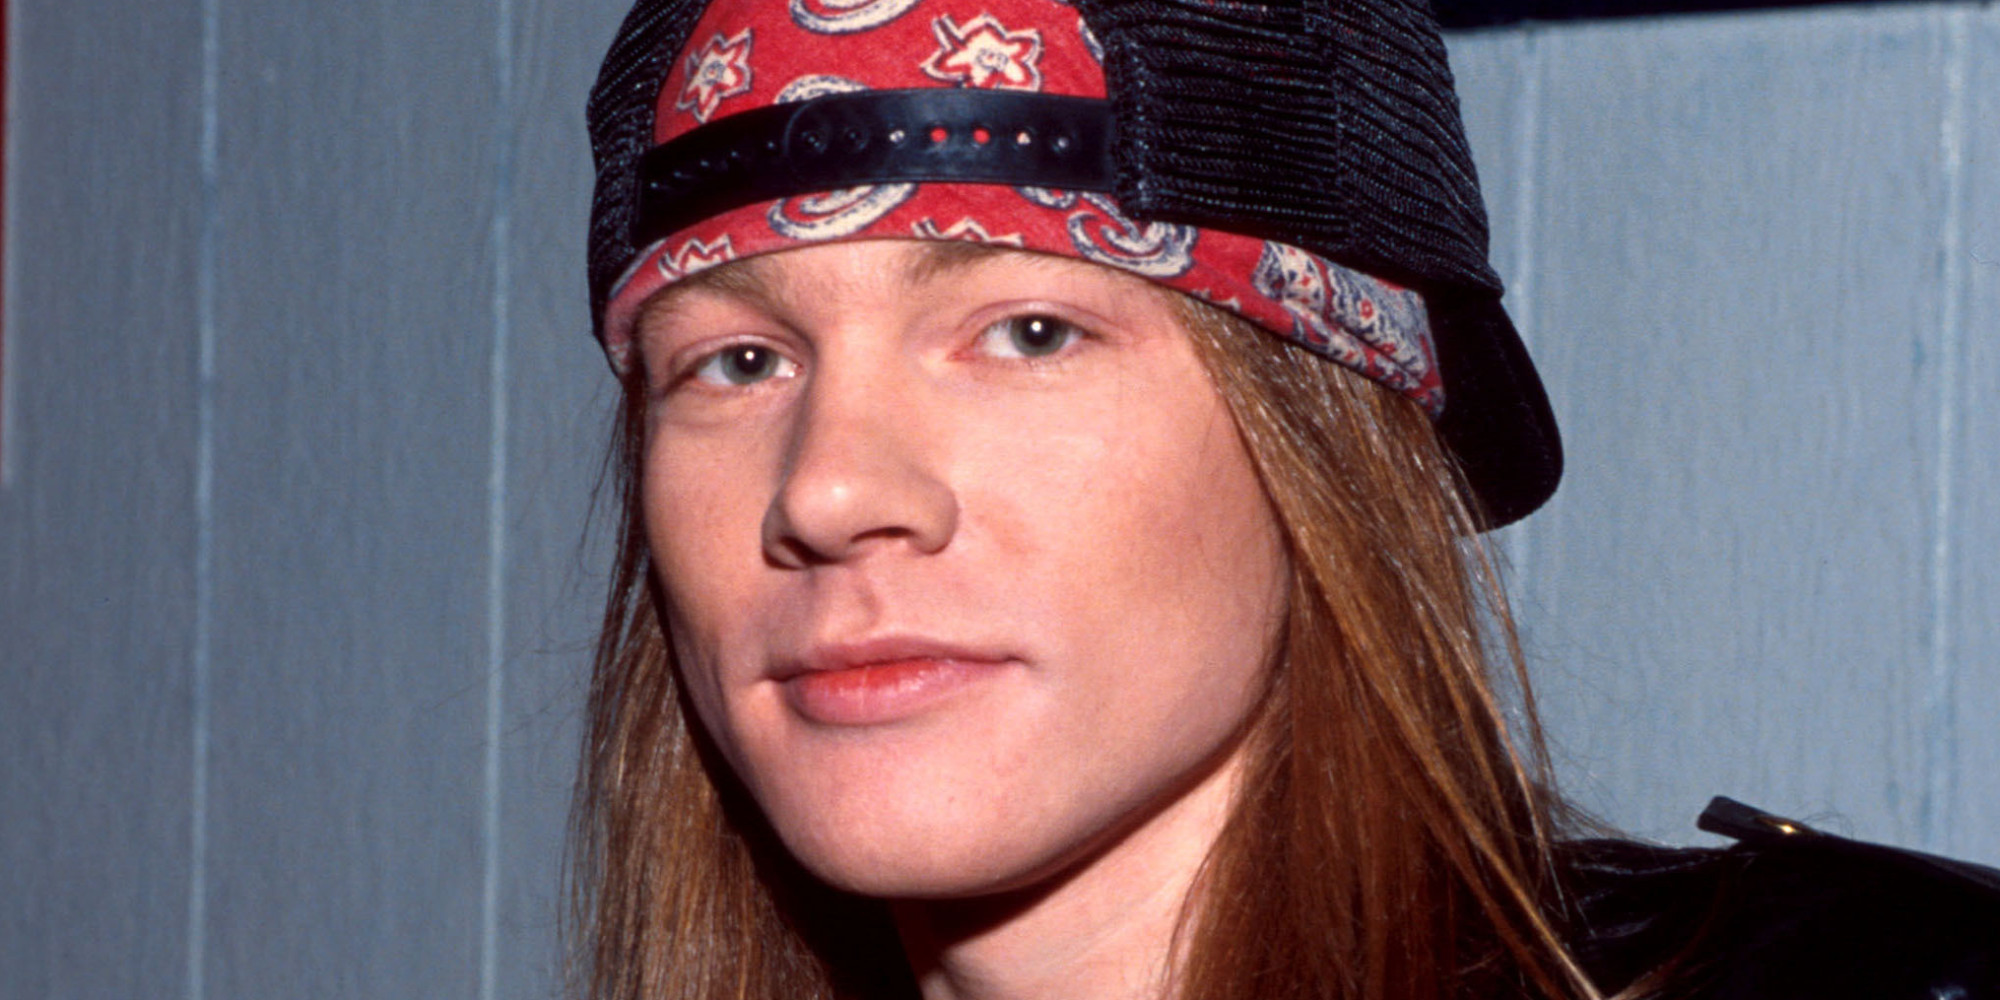 Axl Rose once postponed a Guns N’ Roses show because he was watching TMNT 2: Secret of the Ooze.